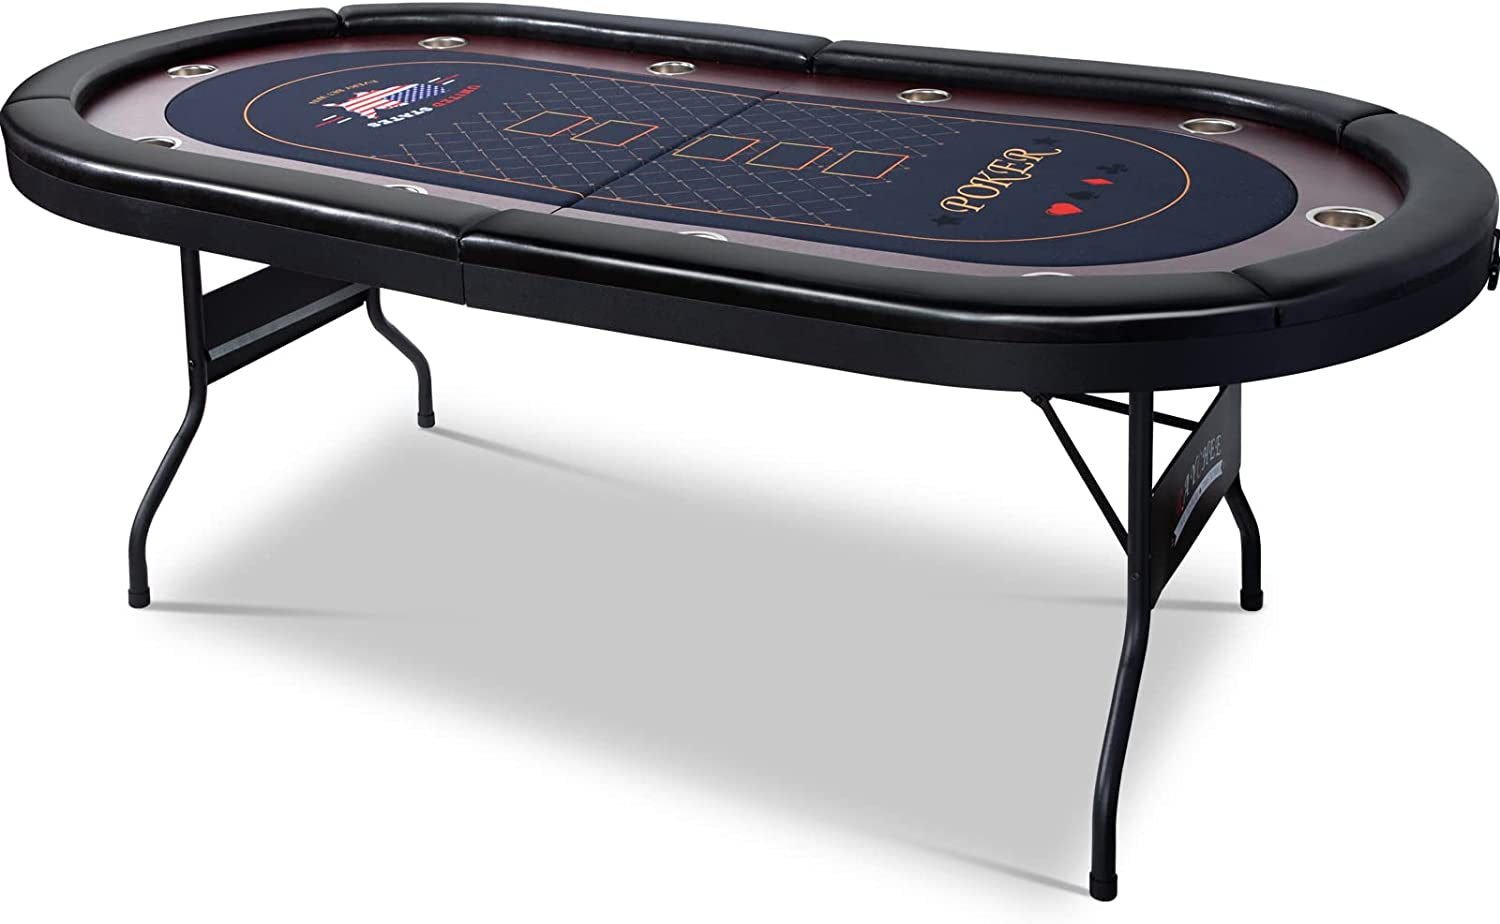 8 Player Foldable Poker Table, Texas Holdem Table, Folding Leisure Game Table, Portable Casino Table for Game Room with Padded Rails and Cup Holders (Brown, 71 Inch)